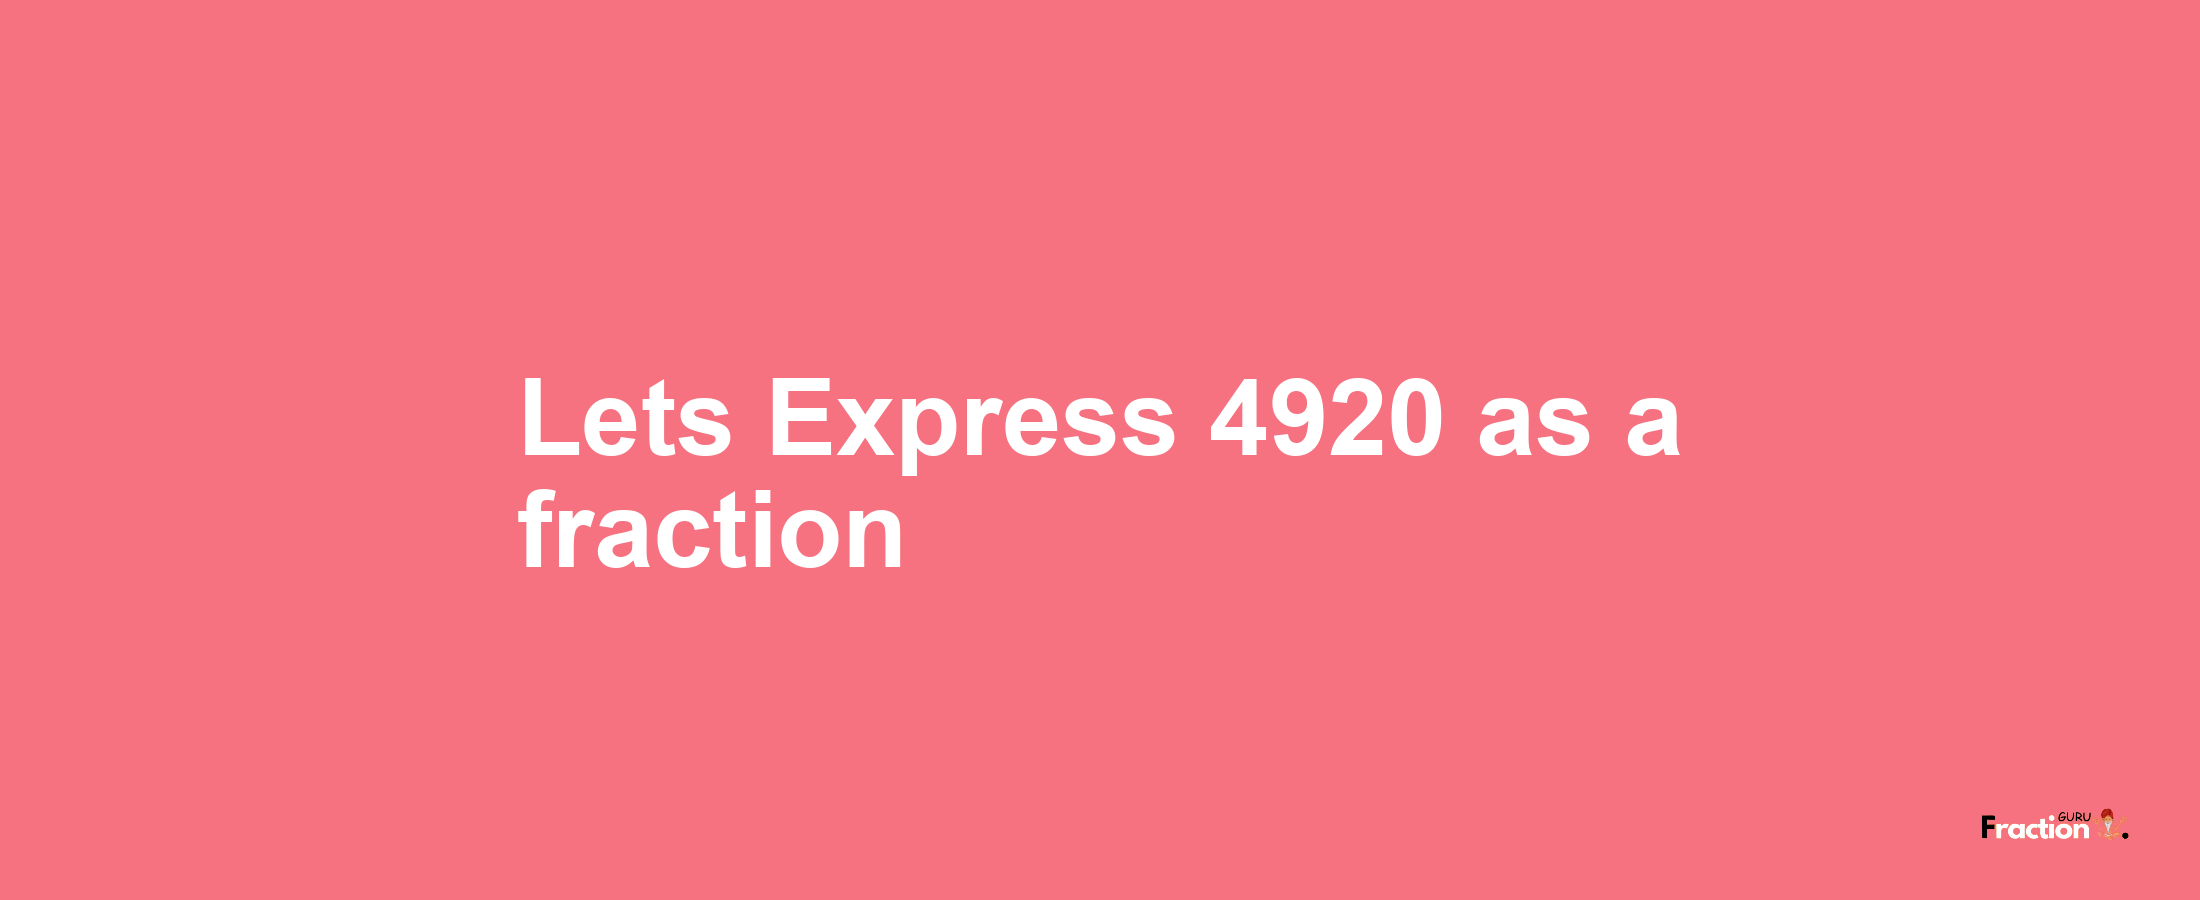 Lets Express 4920 as afraction